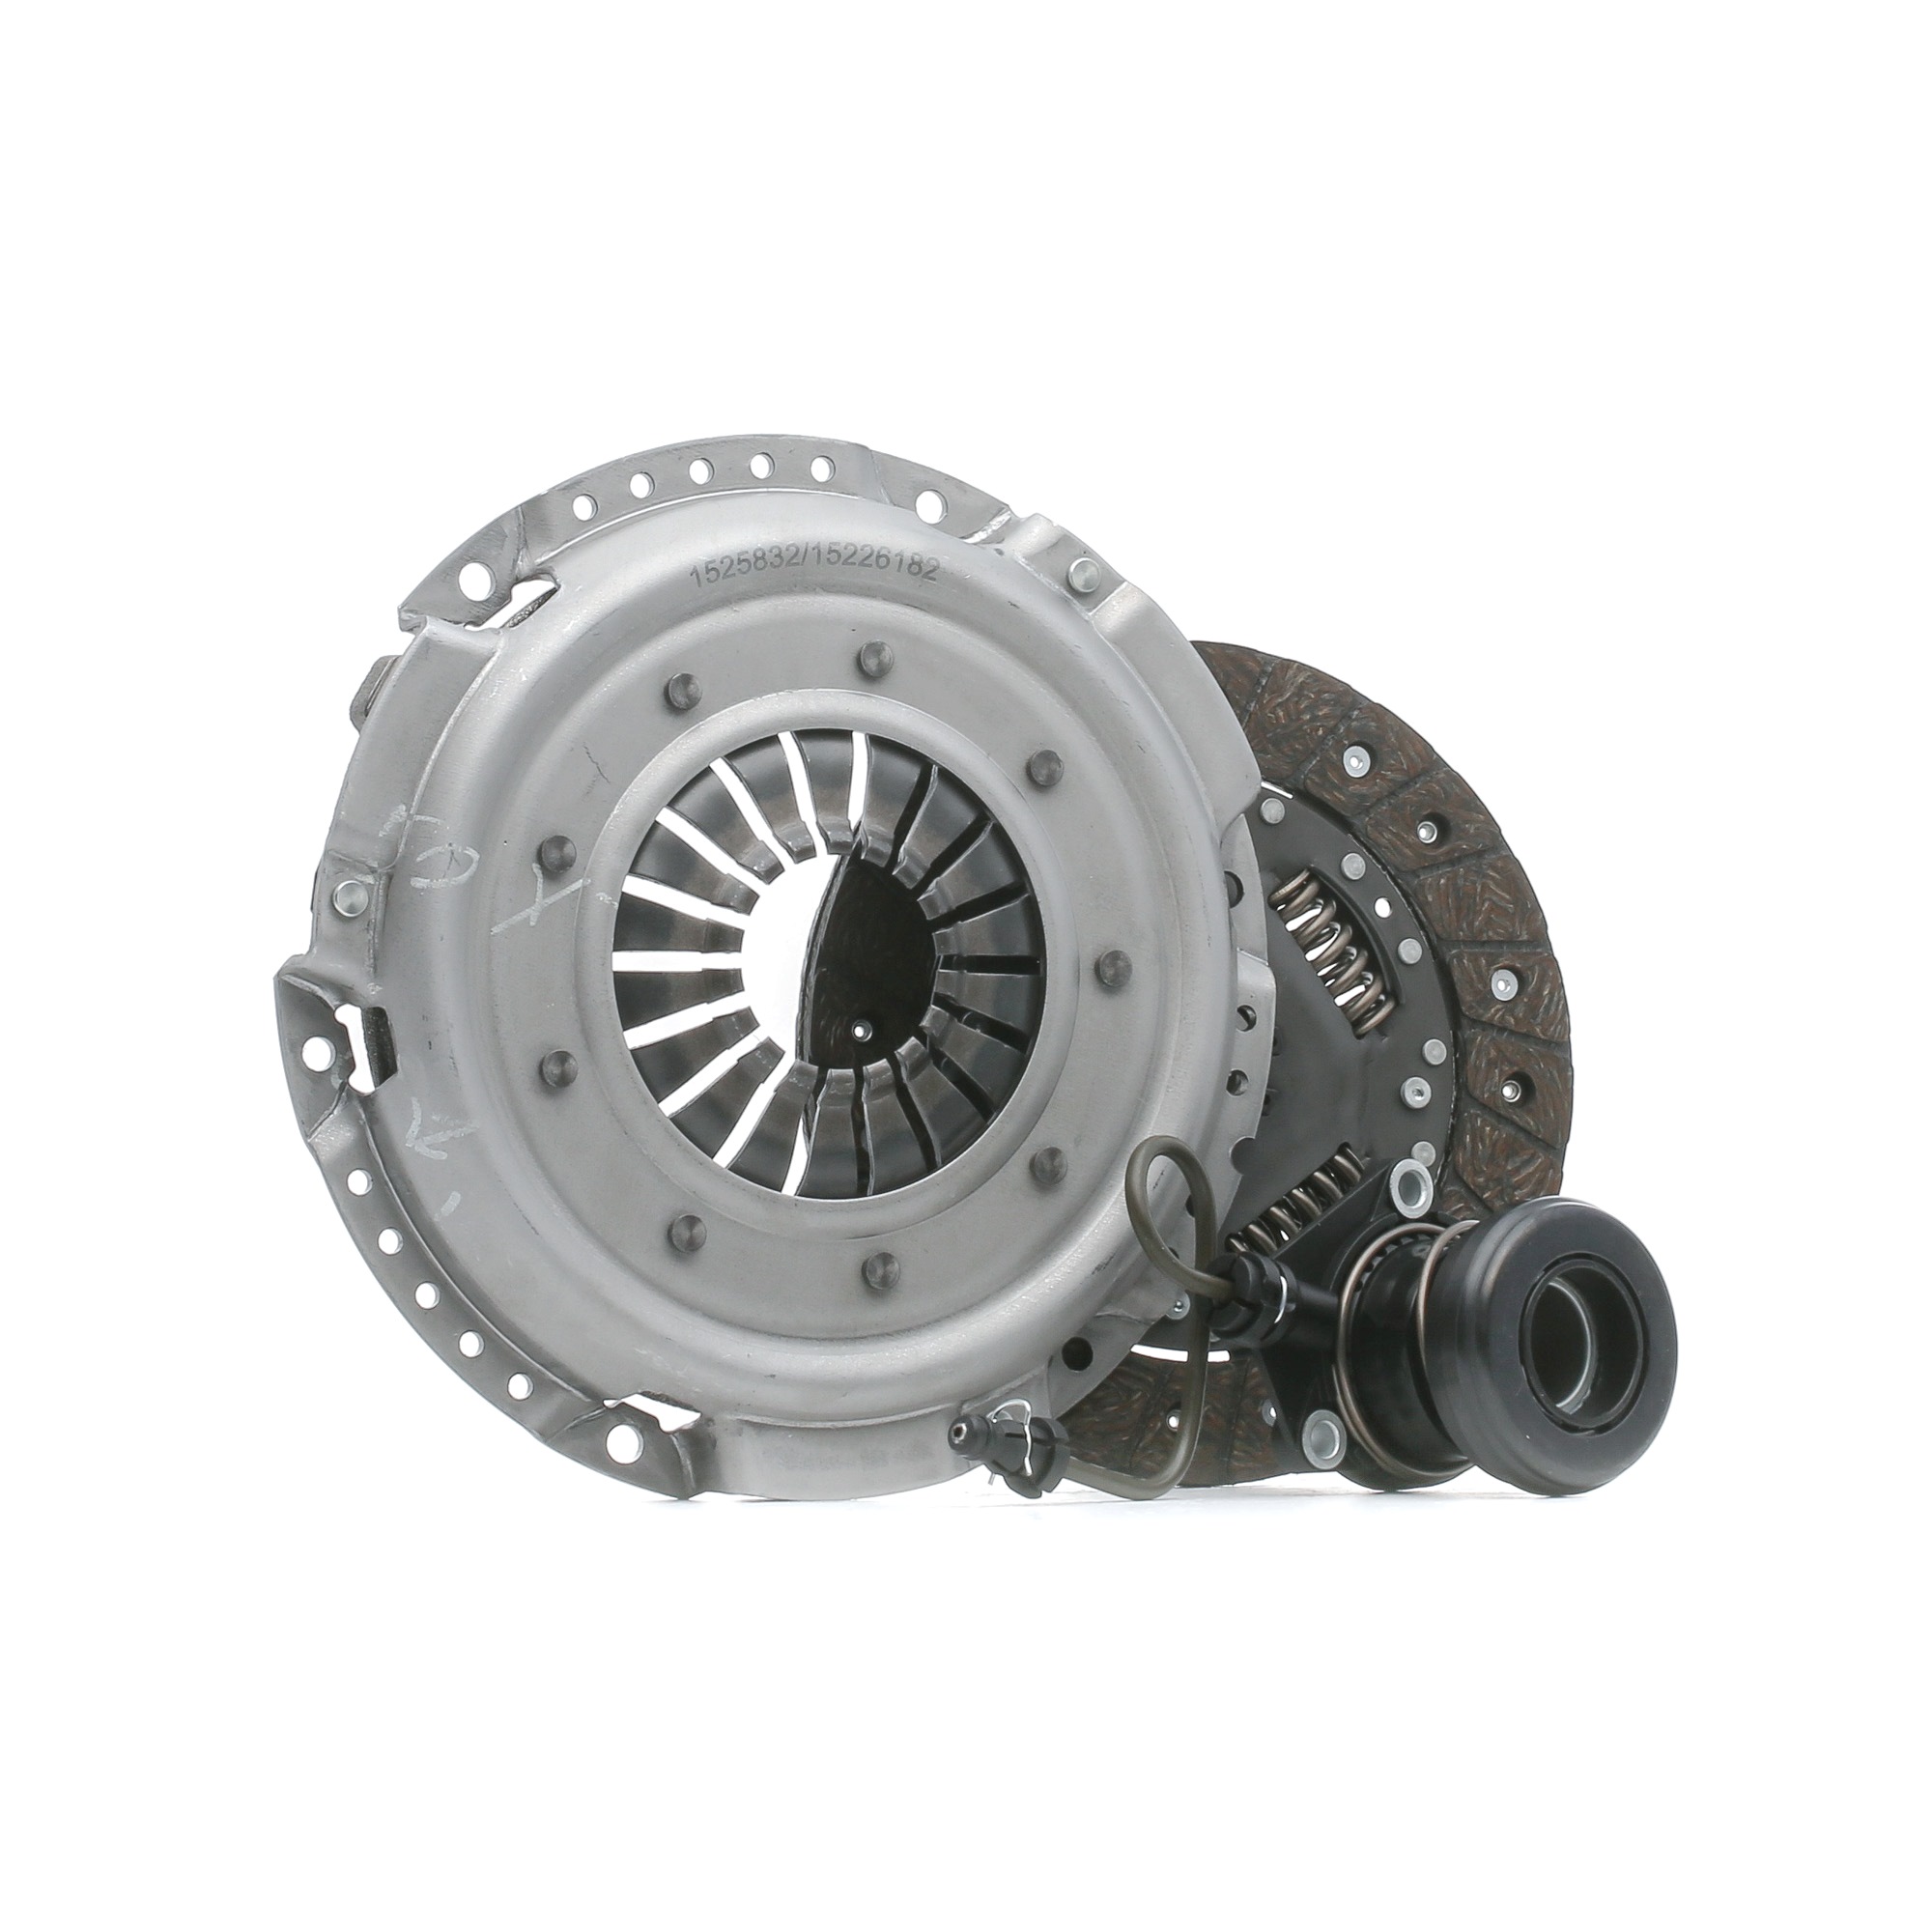 RIDEX 479C0482 OPEL CORSA 2000 Clutch replacement kit